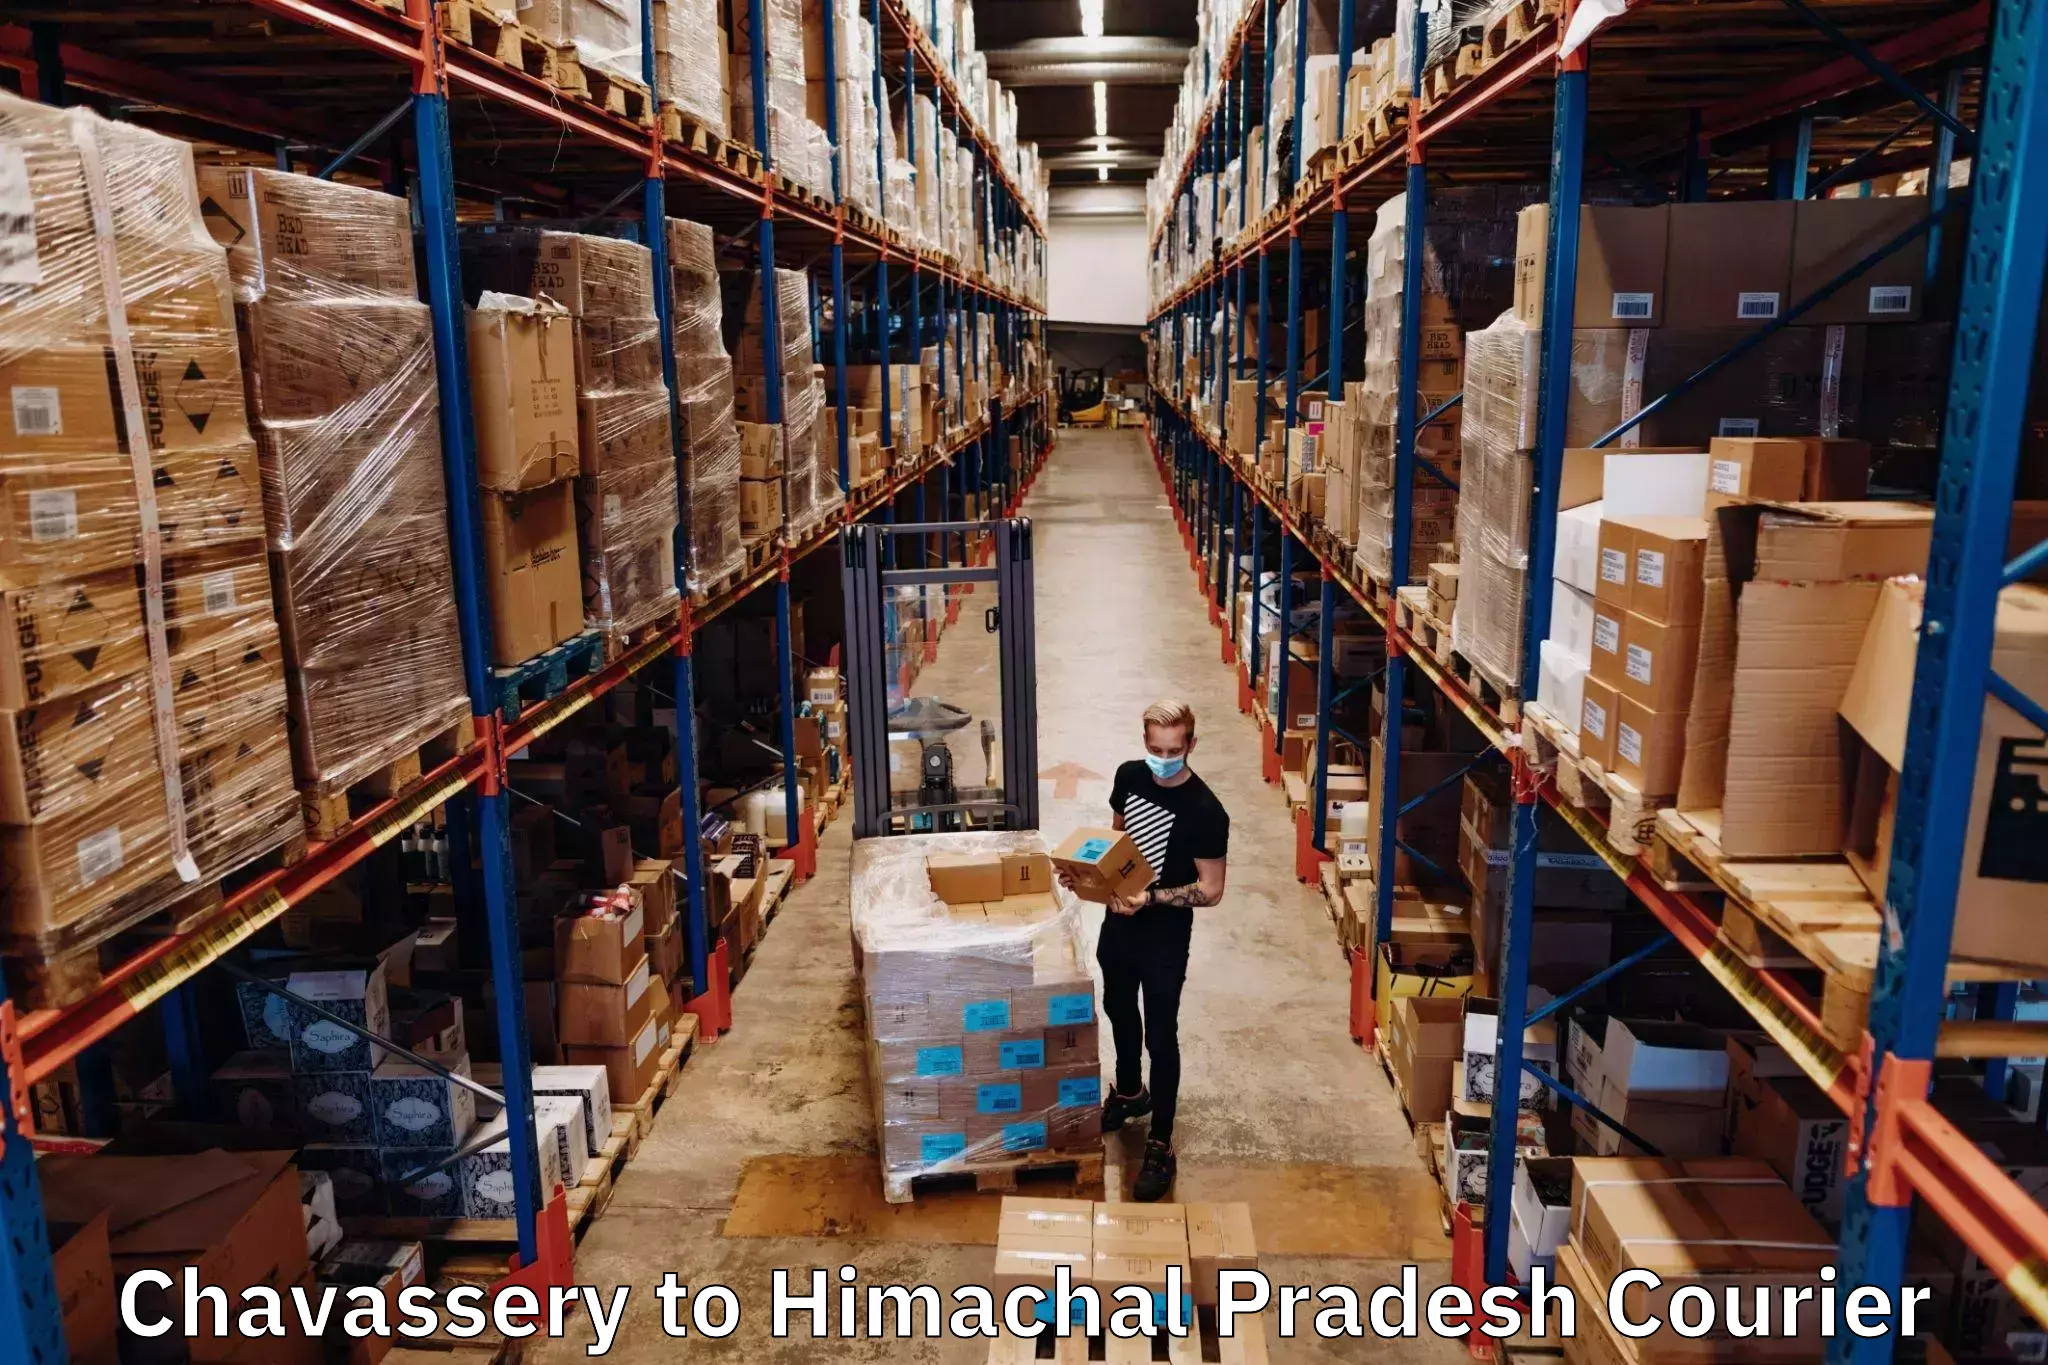 Courier service booking Chavassery to Himachal Pradesh